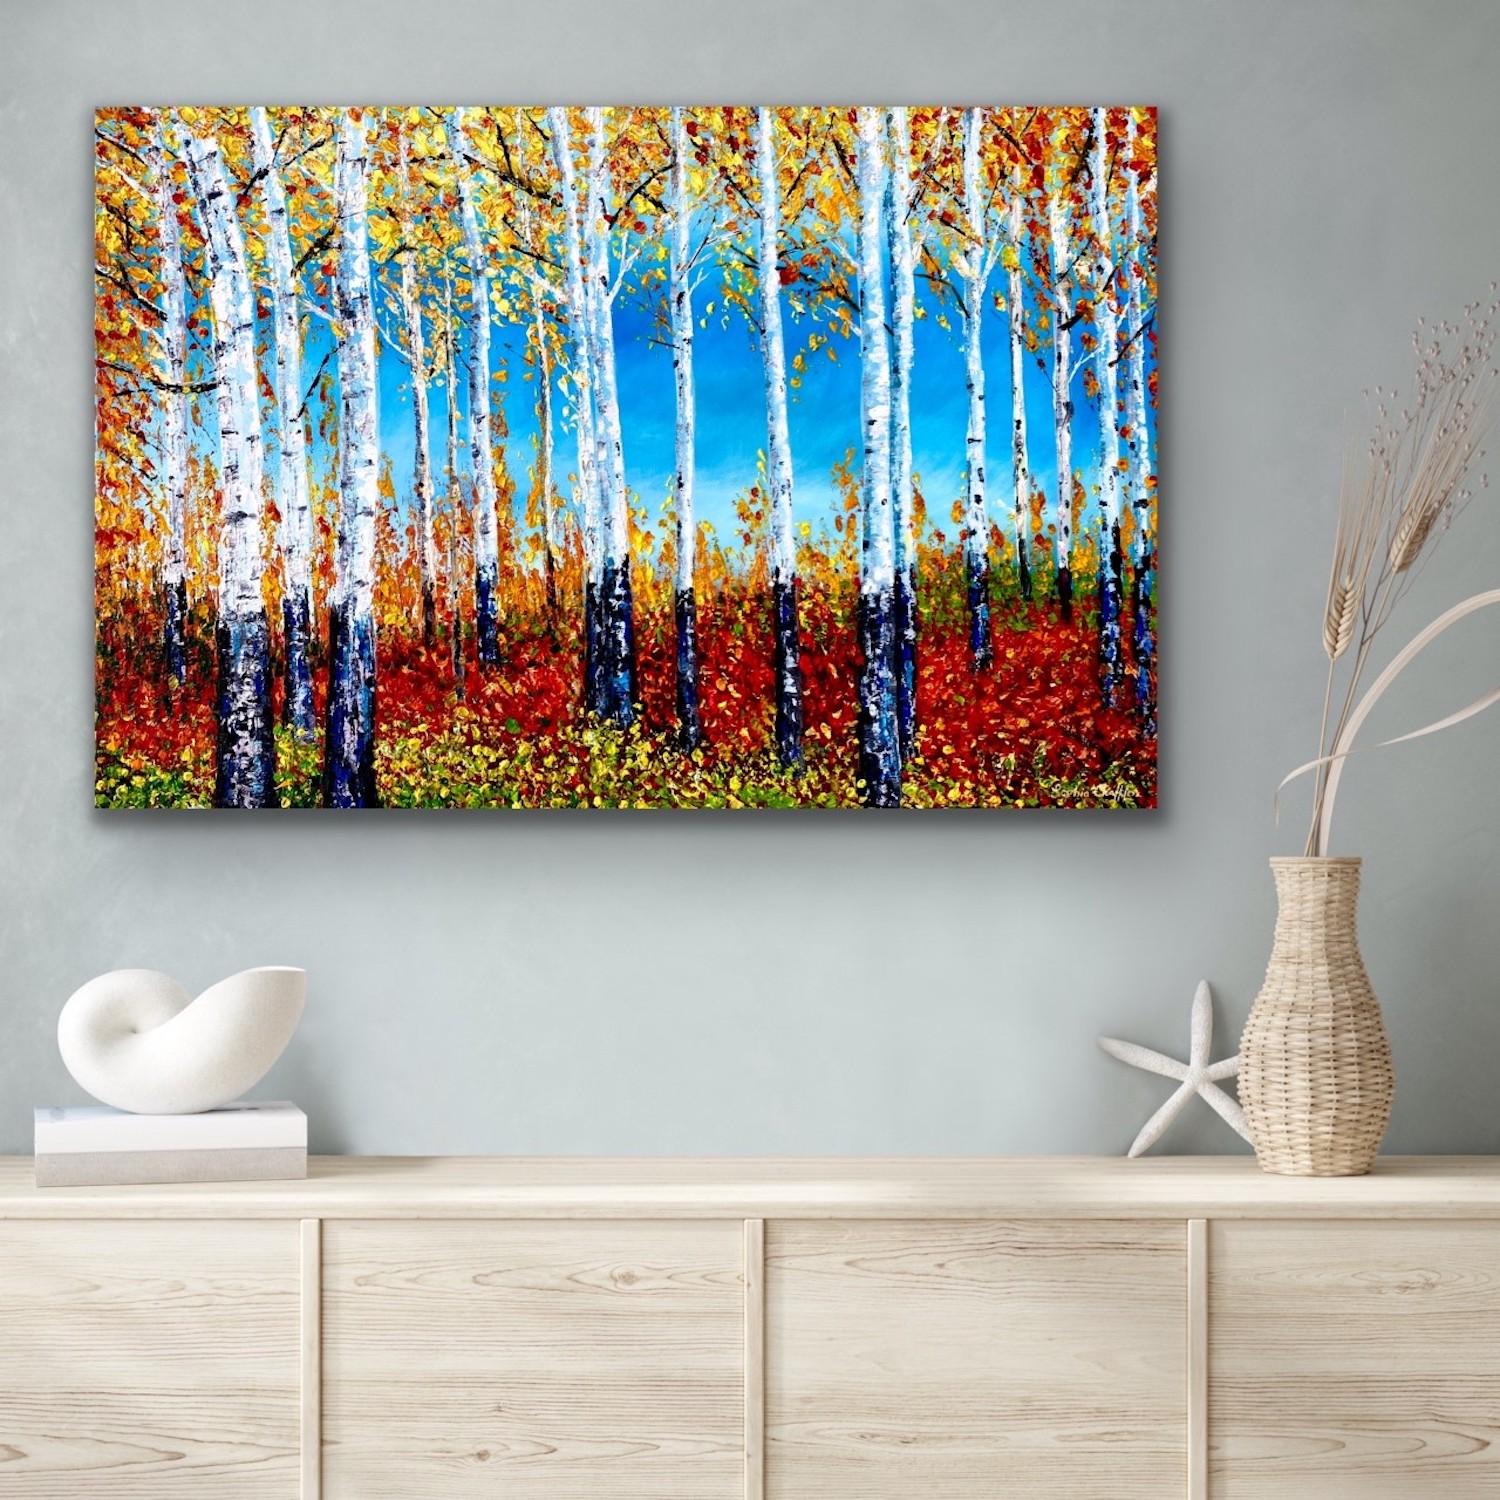 Forest Of Dreams by Sophia Chalklen [2022]
original and hang signed by the artist 

Oil Paint

Image size: H:51 cm x W:76 cm

Complete Size of Unframed Work: H:51 cm x W:76 cm x D:1.5cmcm

Sold Unframed

Please note that insitu images are purely an